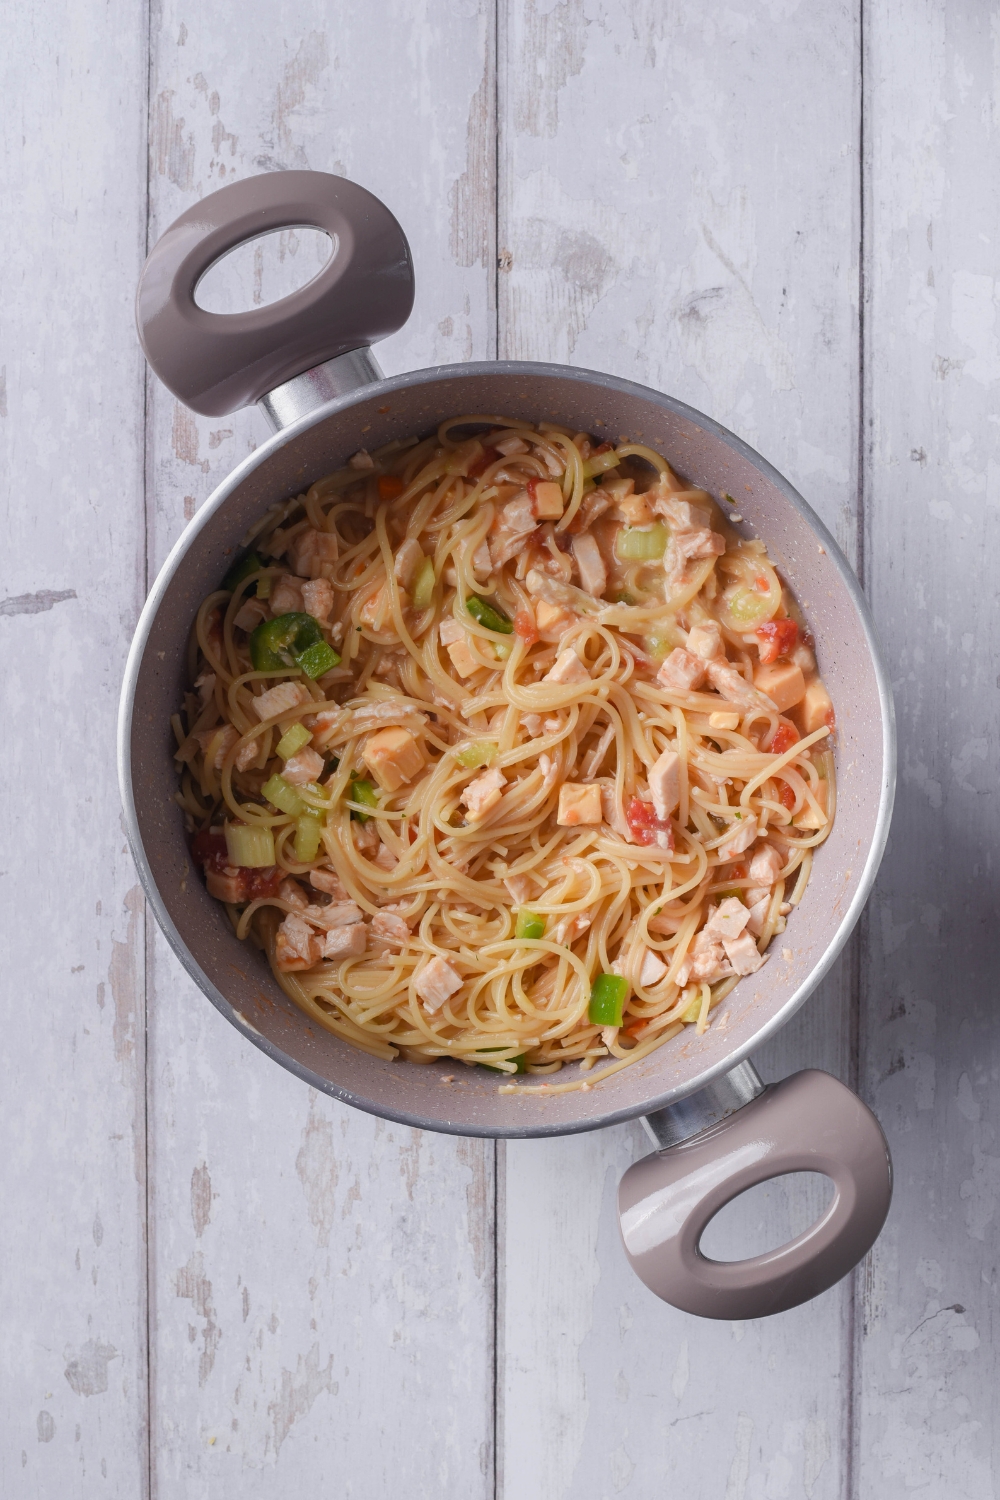 A large pot filled with spaghetti noodles, diced chicken, diced bell peppers, diced tomatoes, and diced celery.